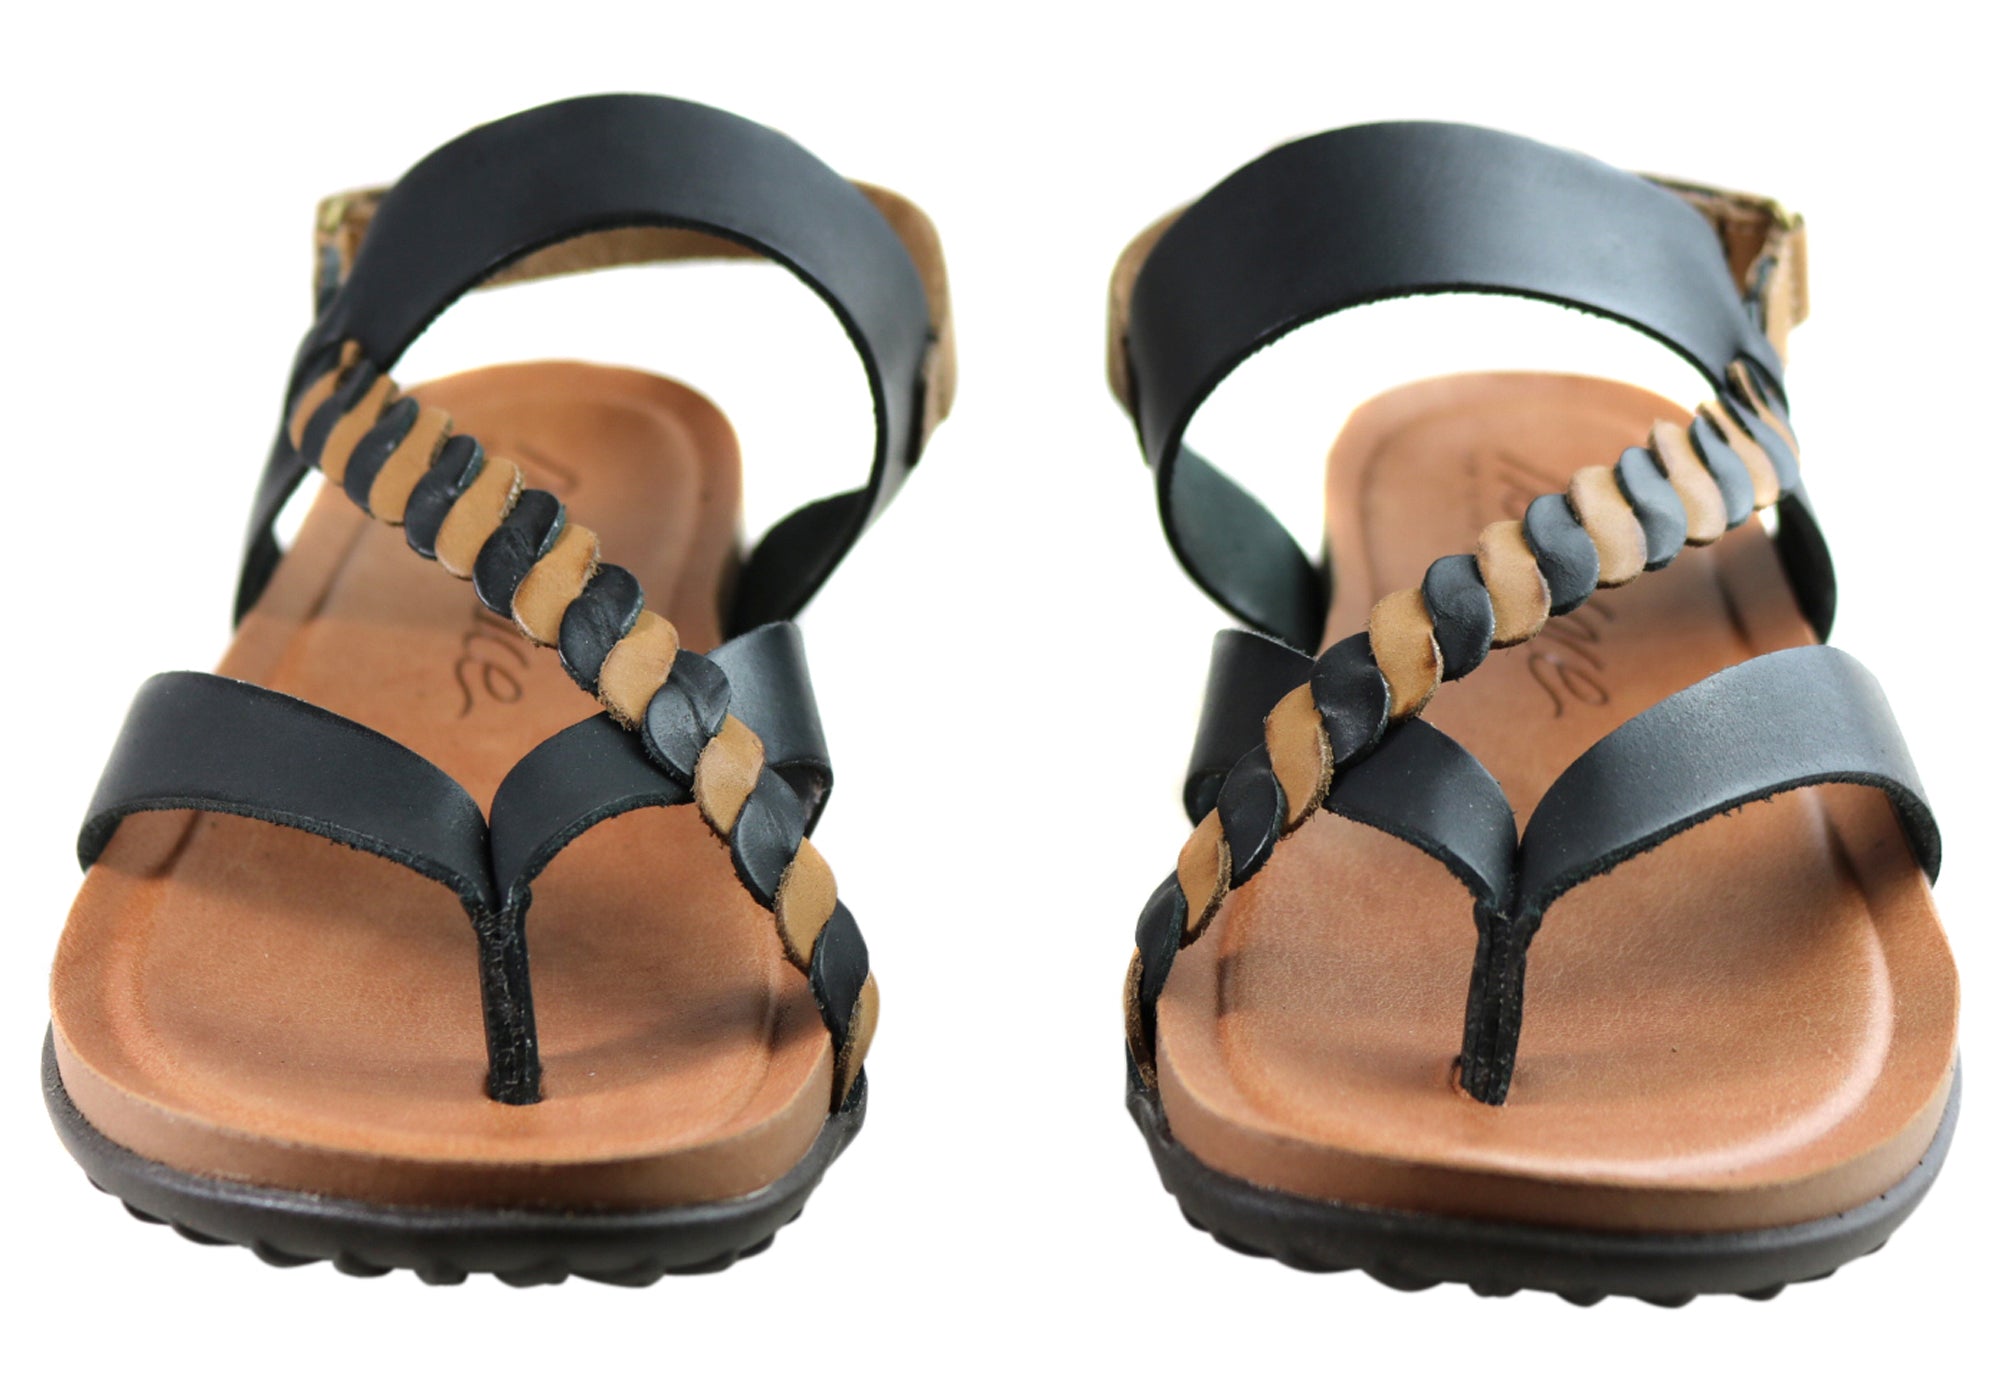 New Face Retreat Womens Comfortable Leather Sandals Made In Brazil